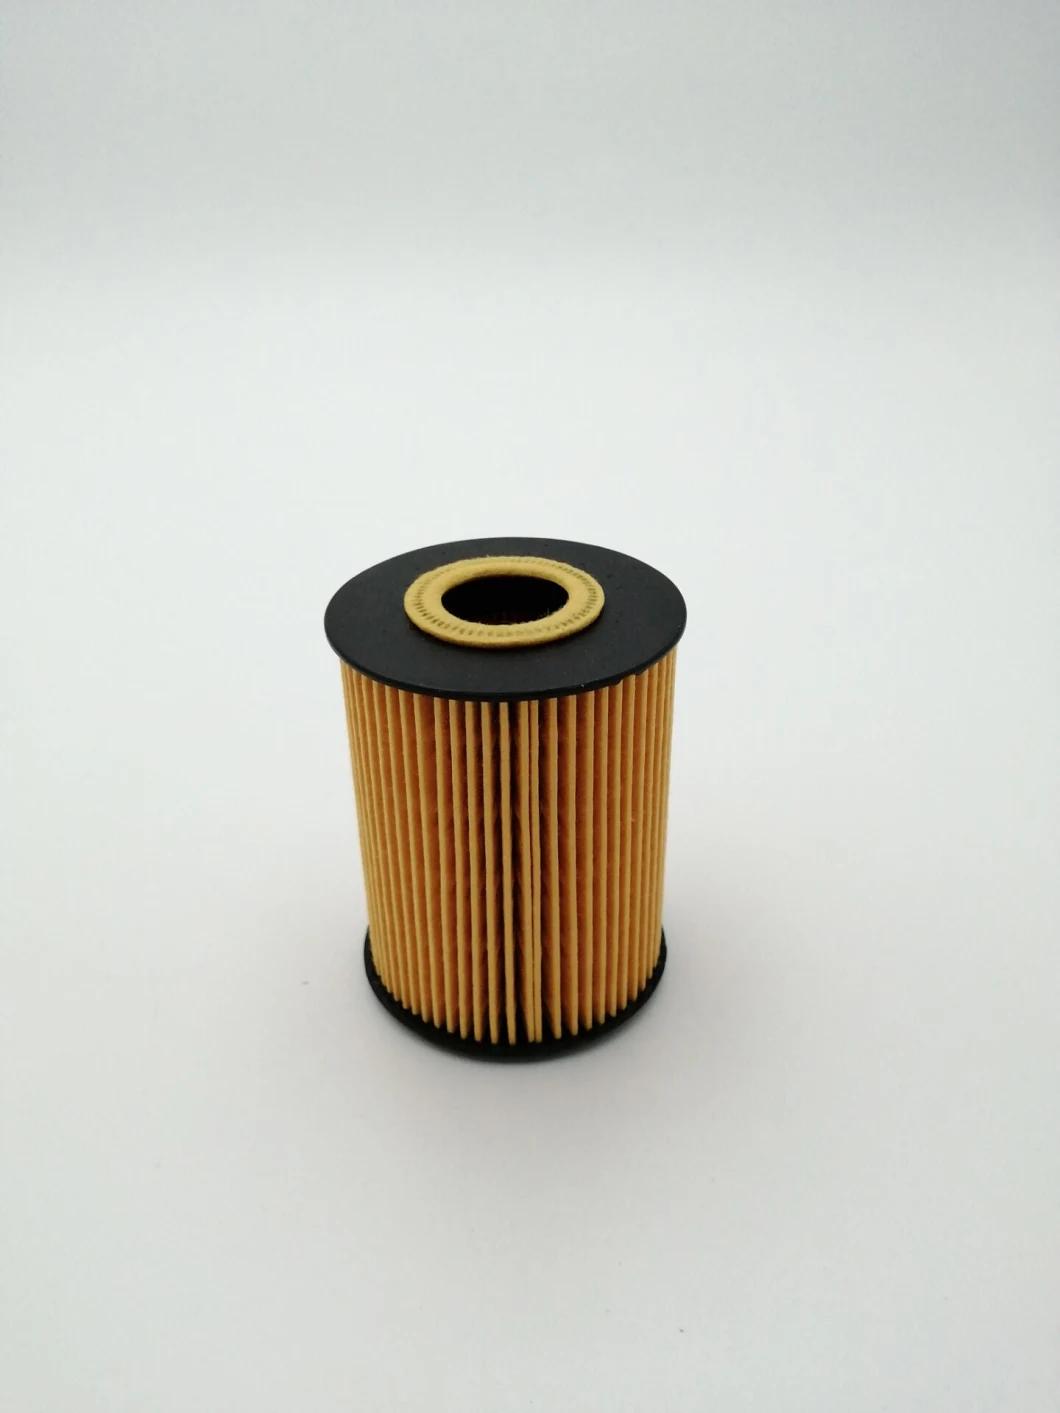 Auto Parts Filter Element Car Parts 96808900/Ox355 3/OFC-5204 Oil Filter for Opel Chevrolet